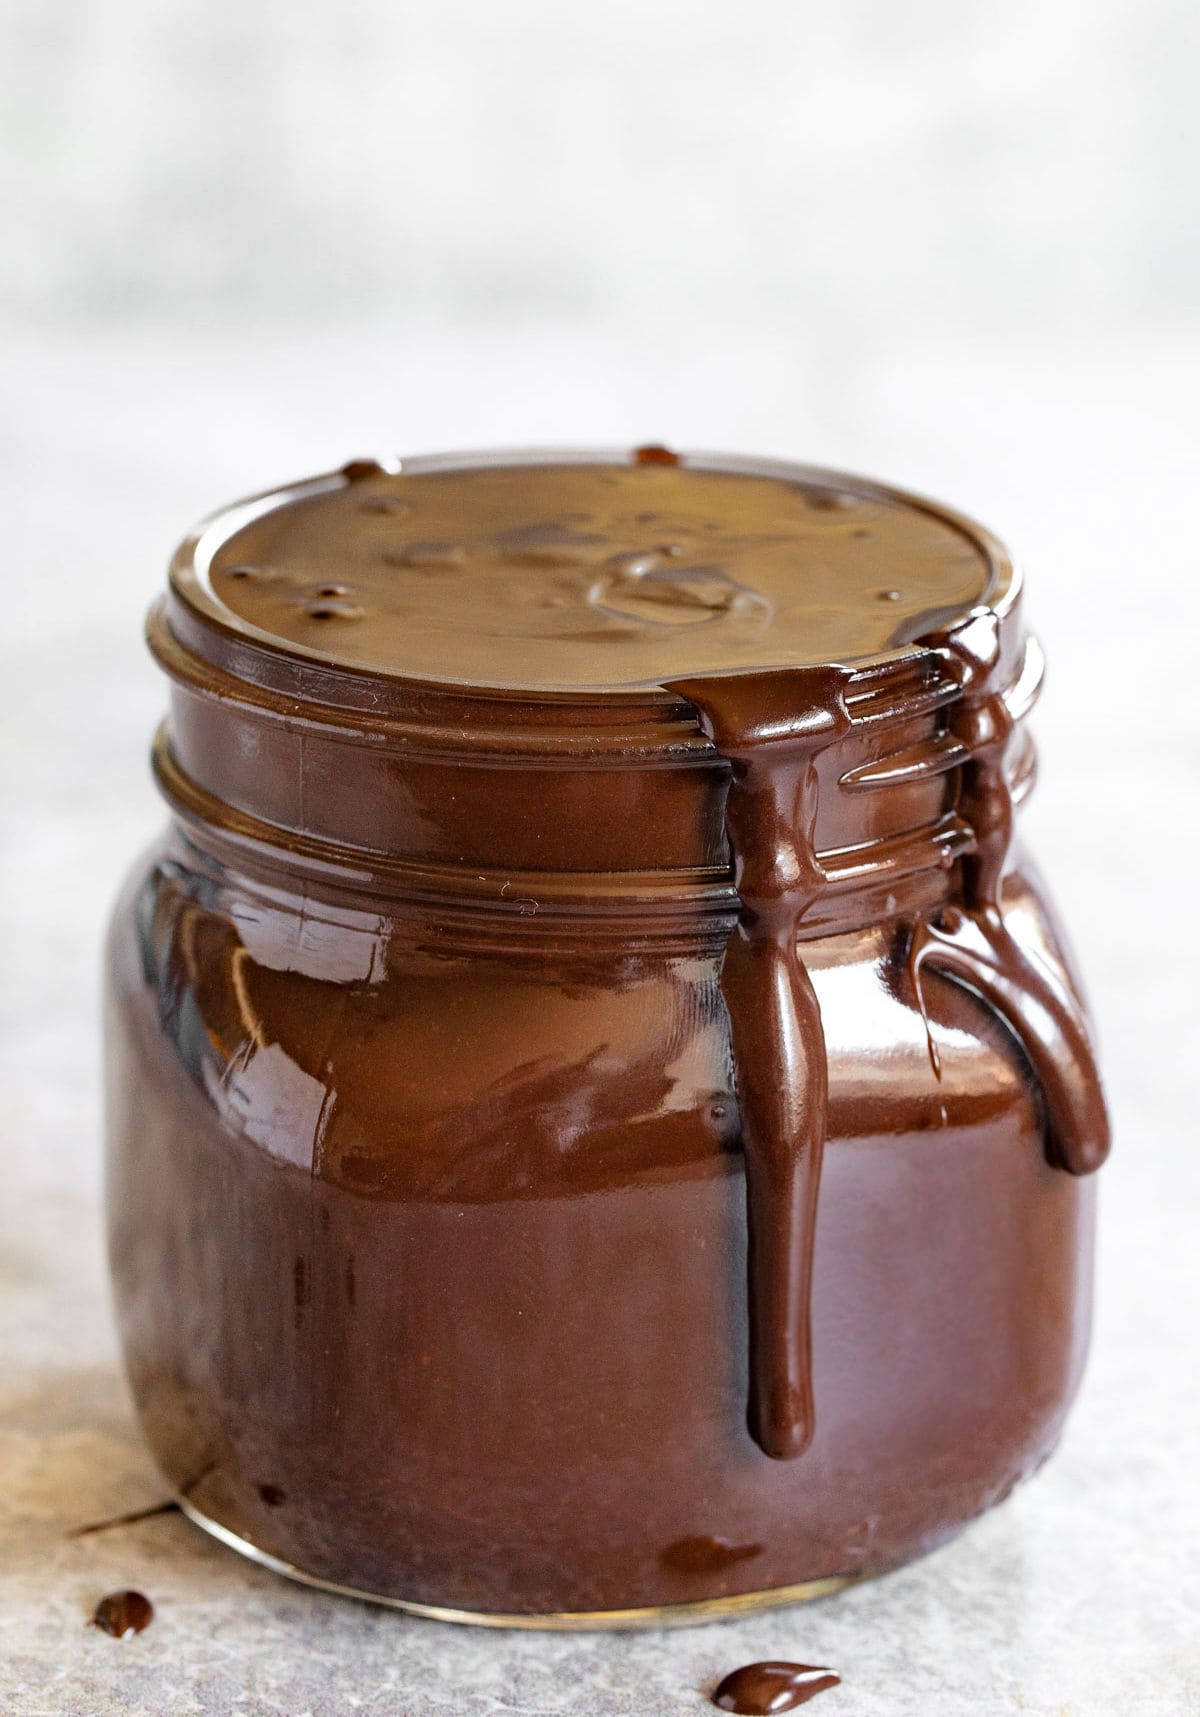 jar of hot fudge sauce with some dripping over the top of the jar.